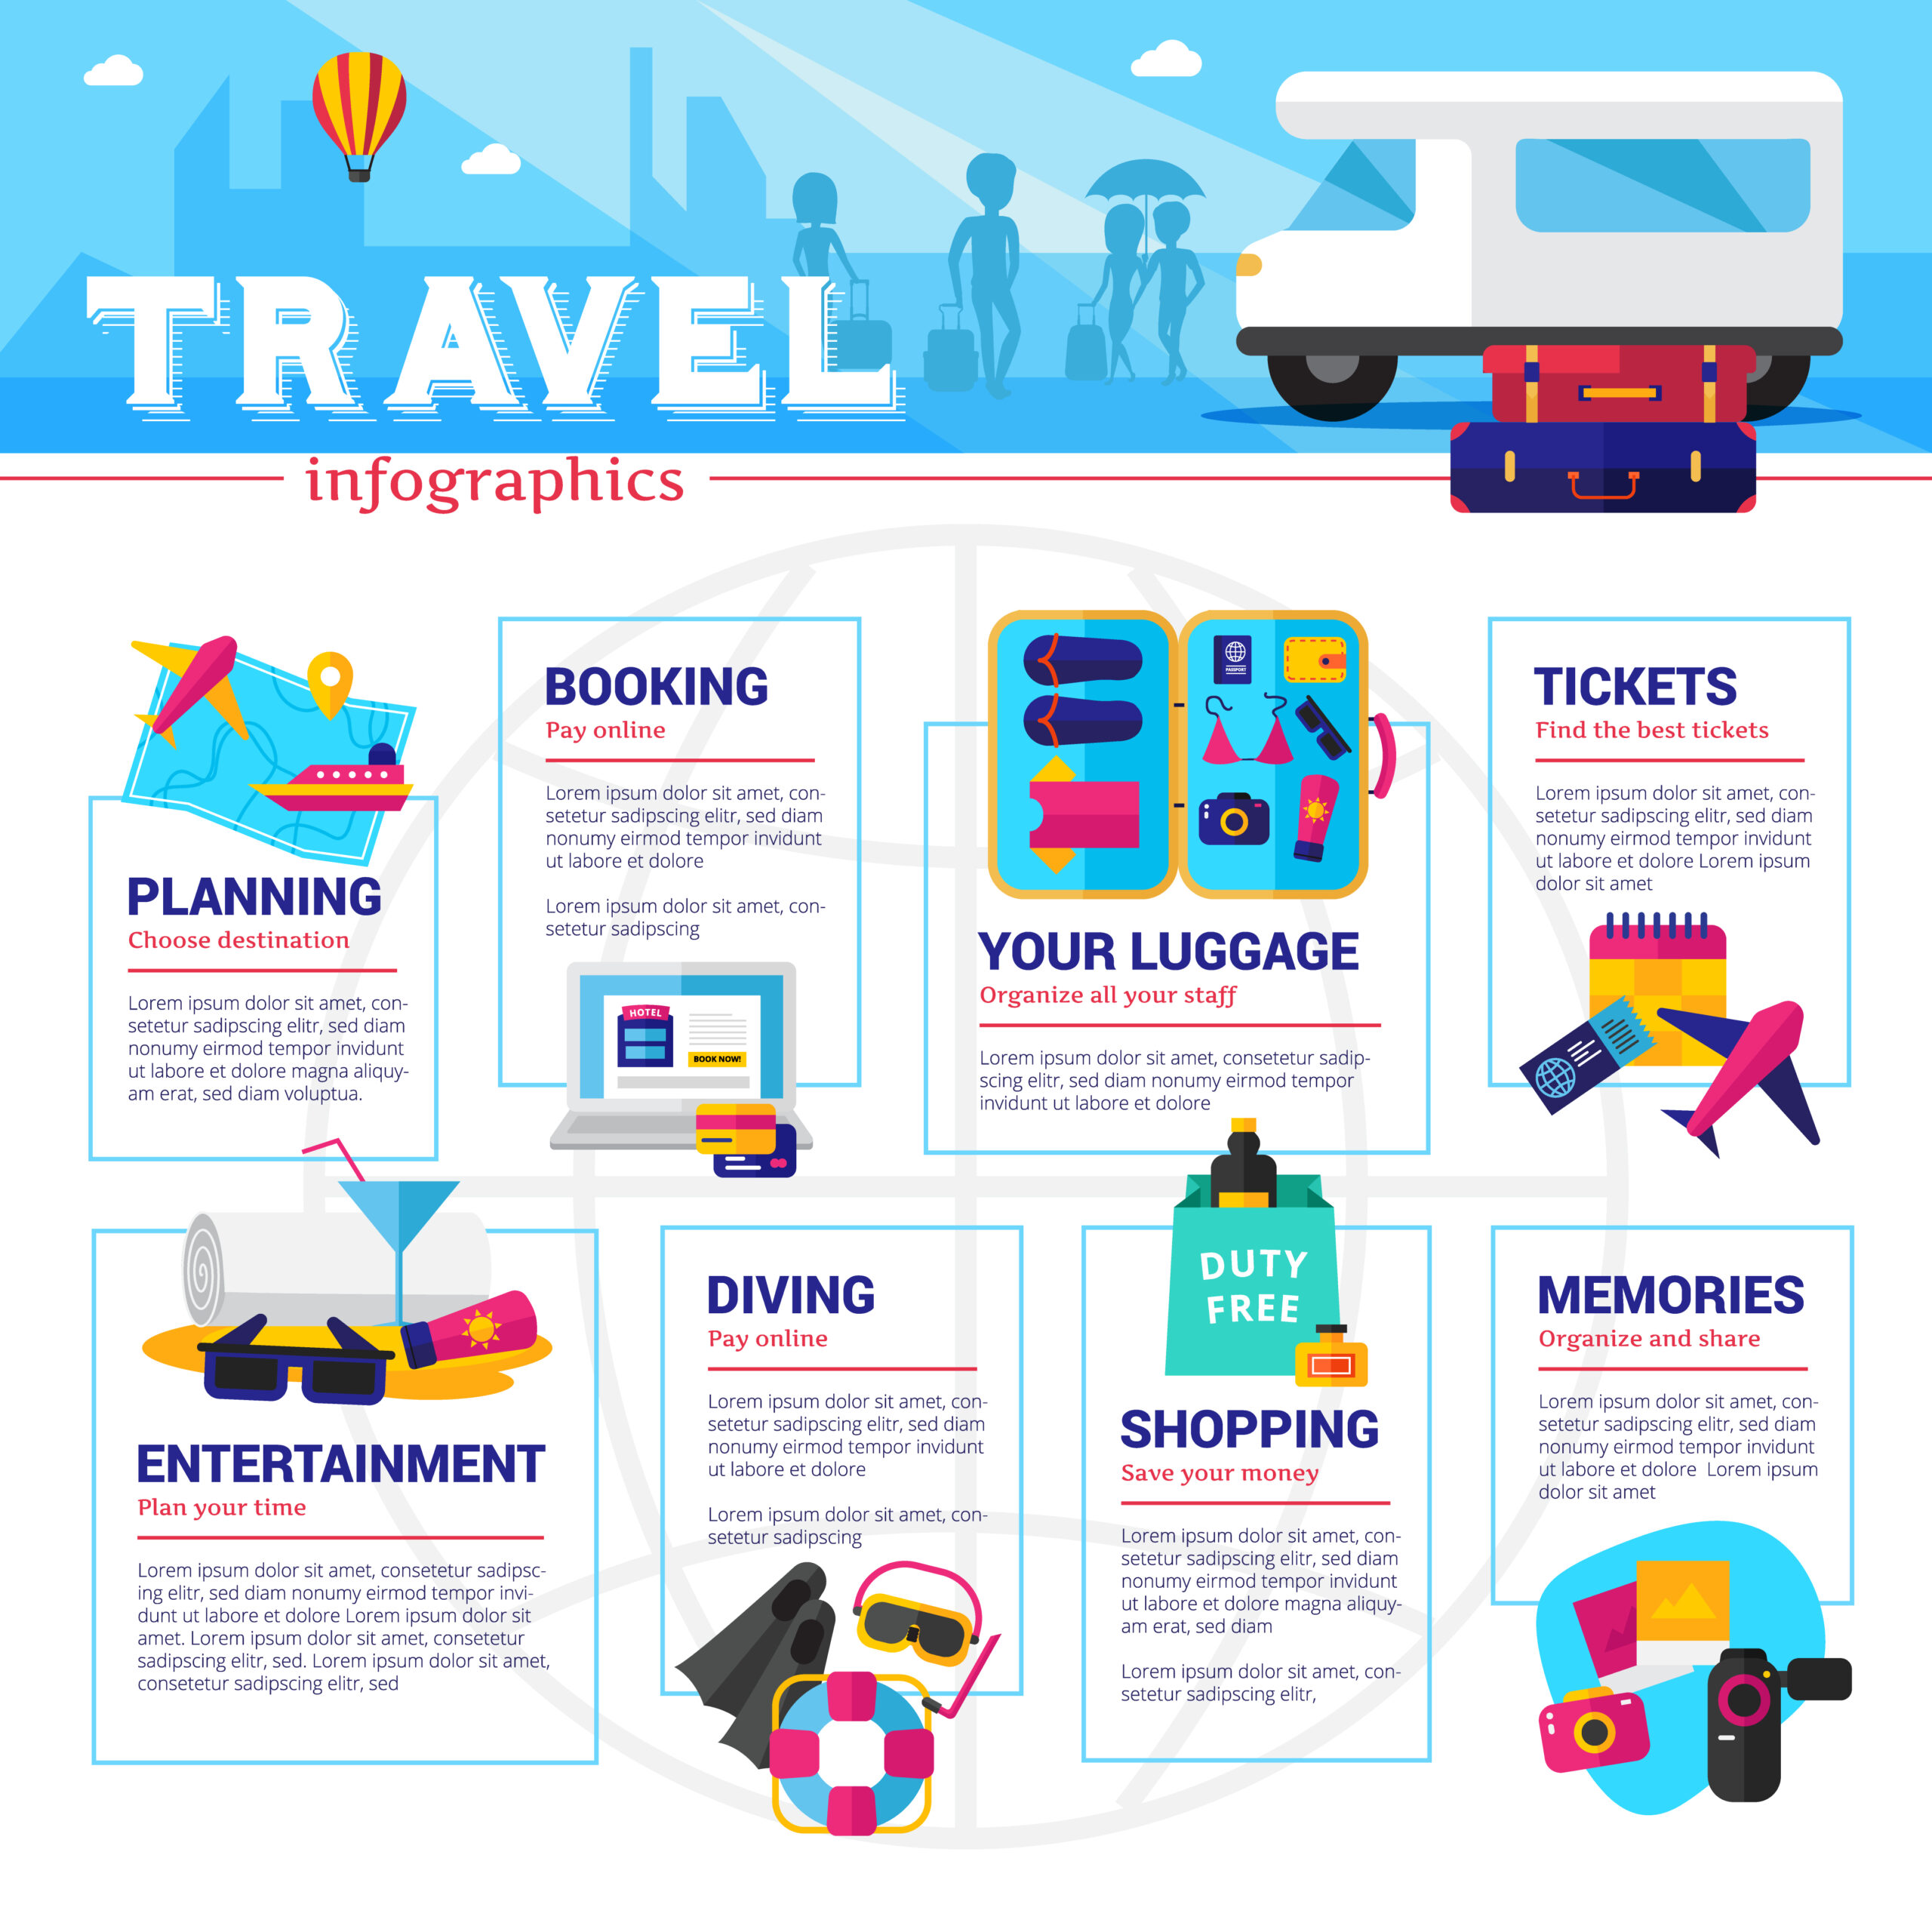 Infographic: Traveling Solo or With a Travel Group?